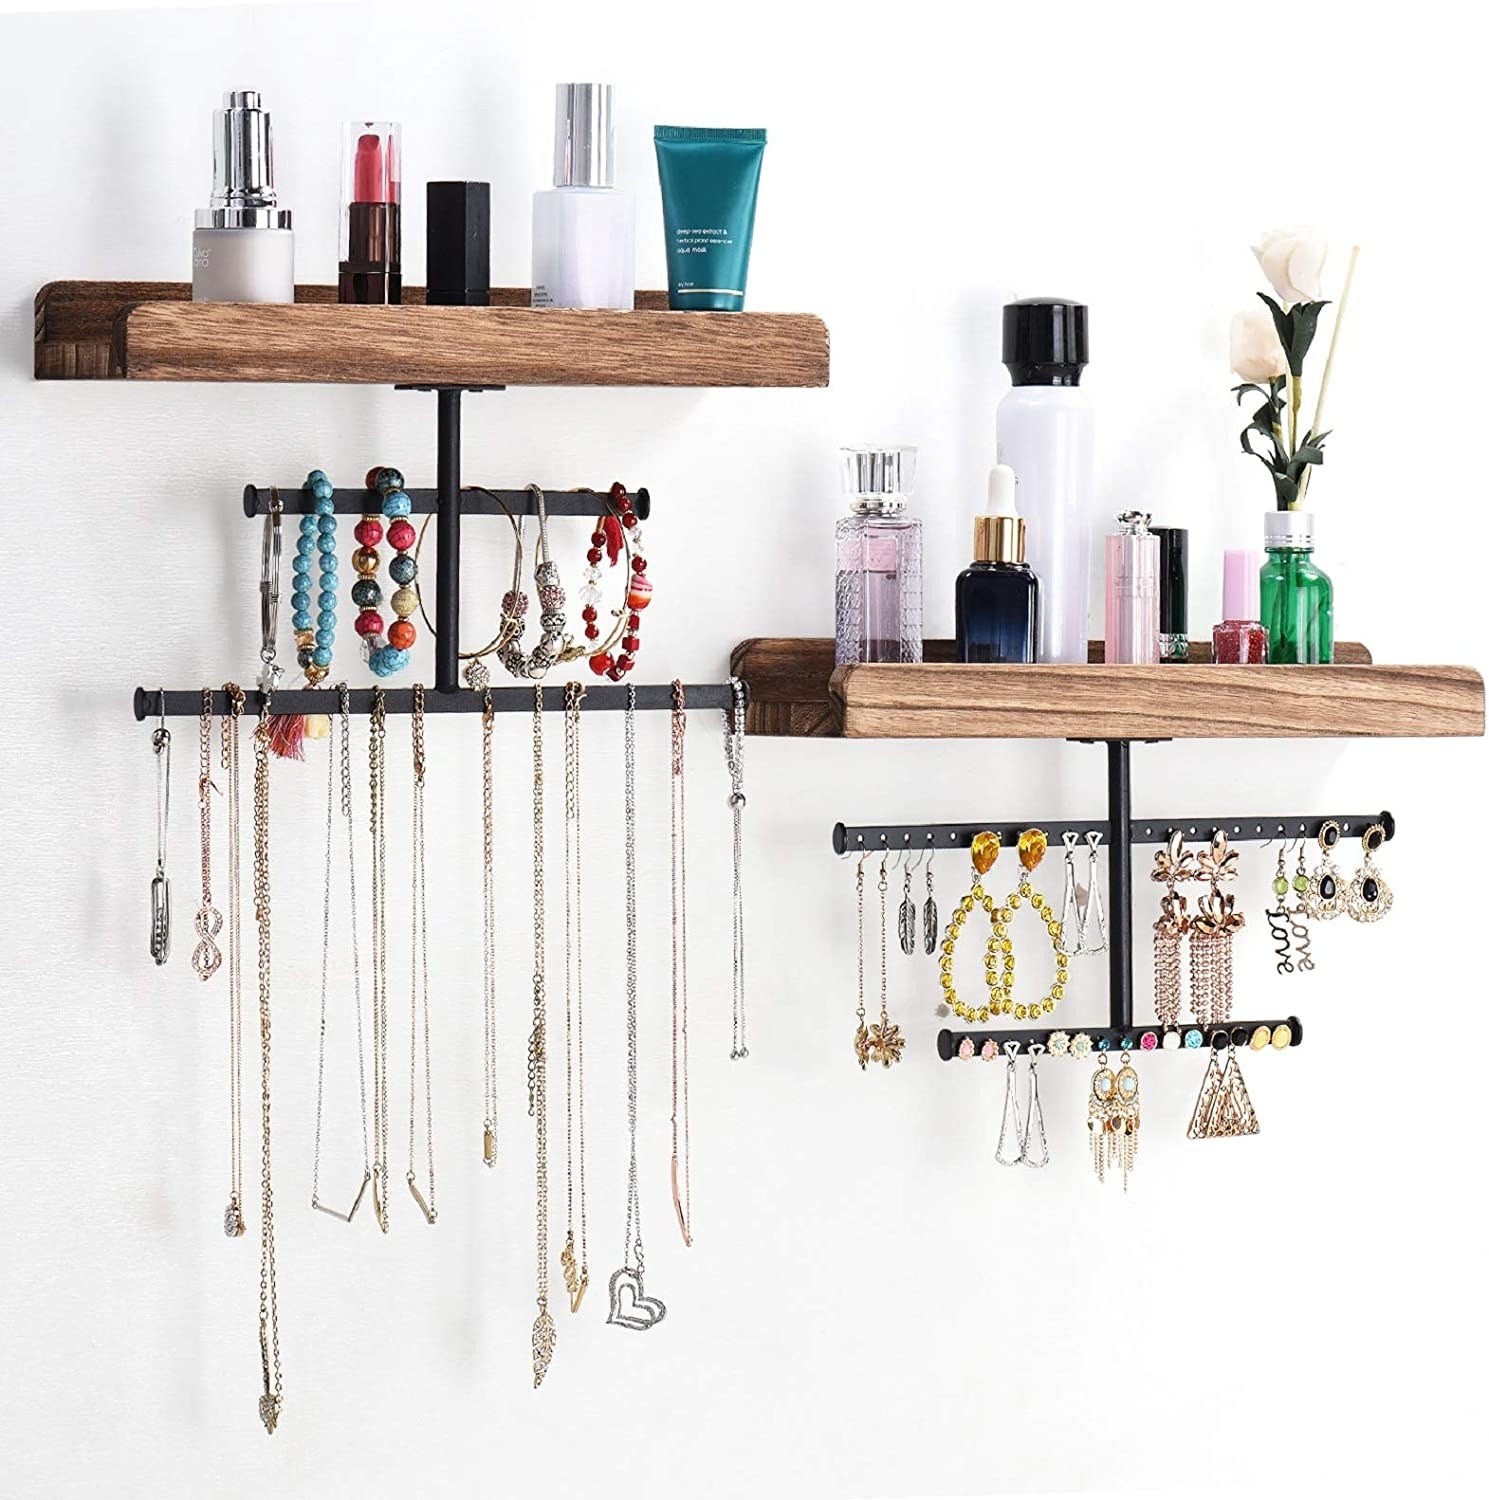 The shelves installed on a wall with jewelry hanging from the hooks